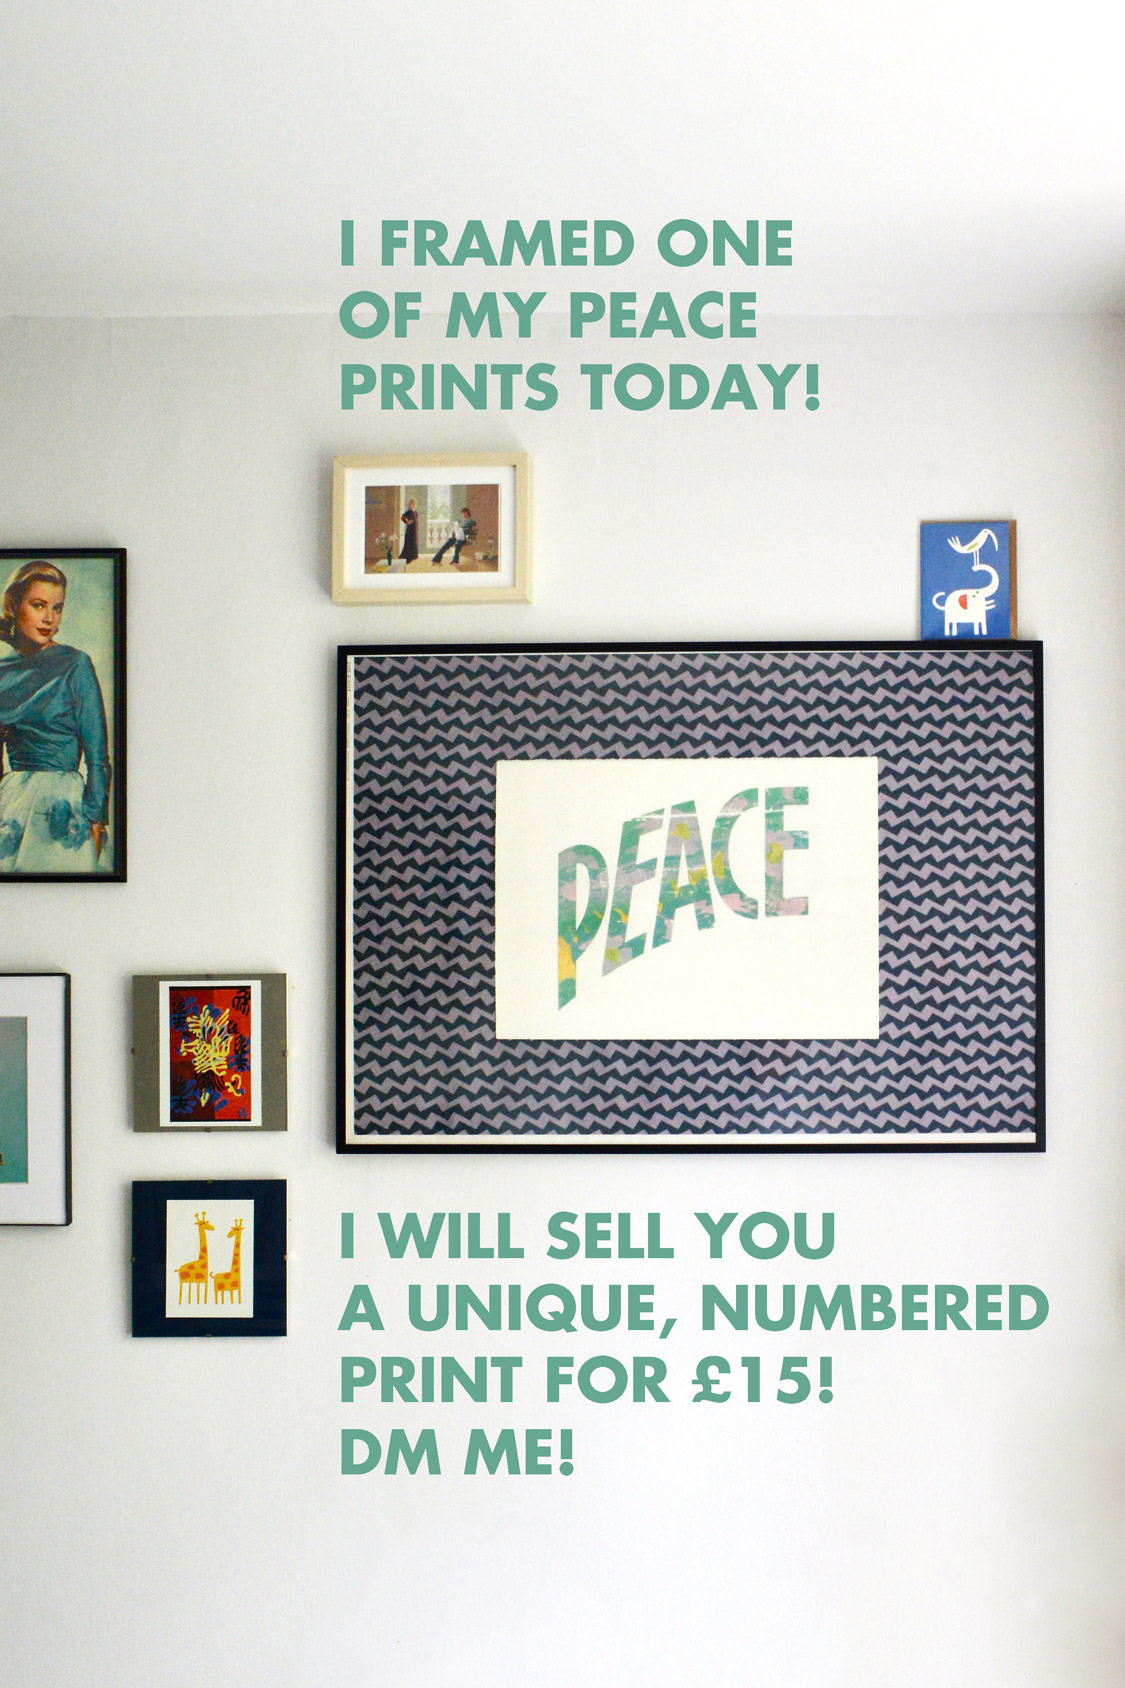 Picture of one of my peace screenprints in a frame on my wall